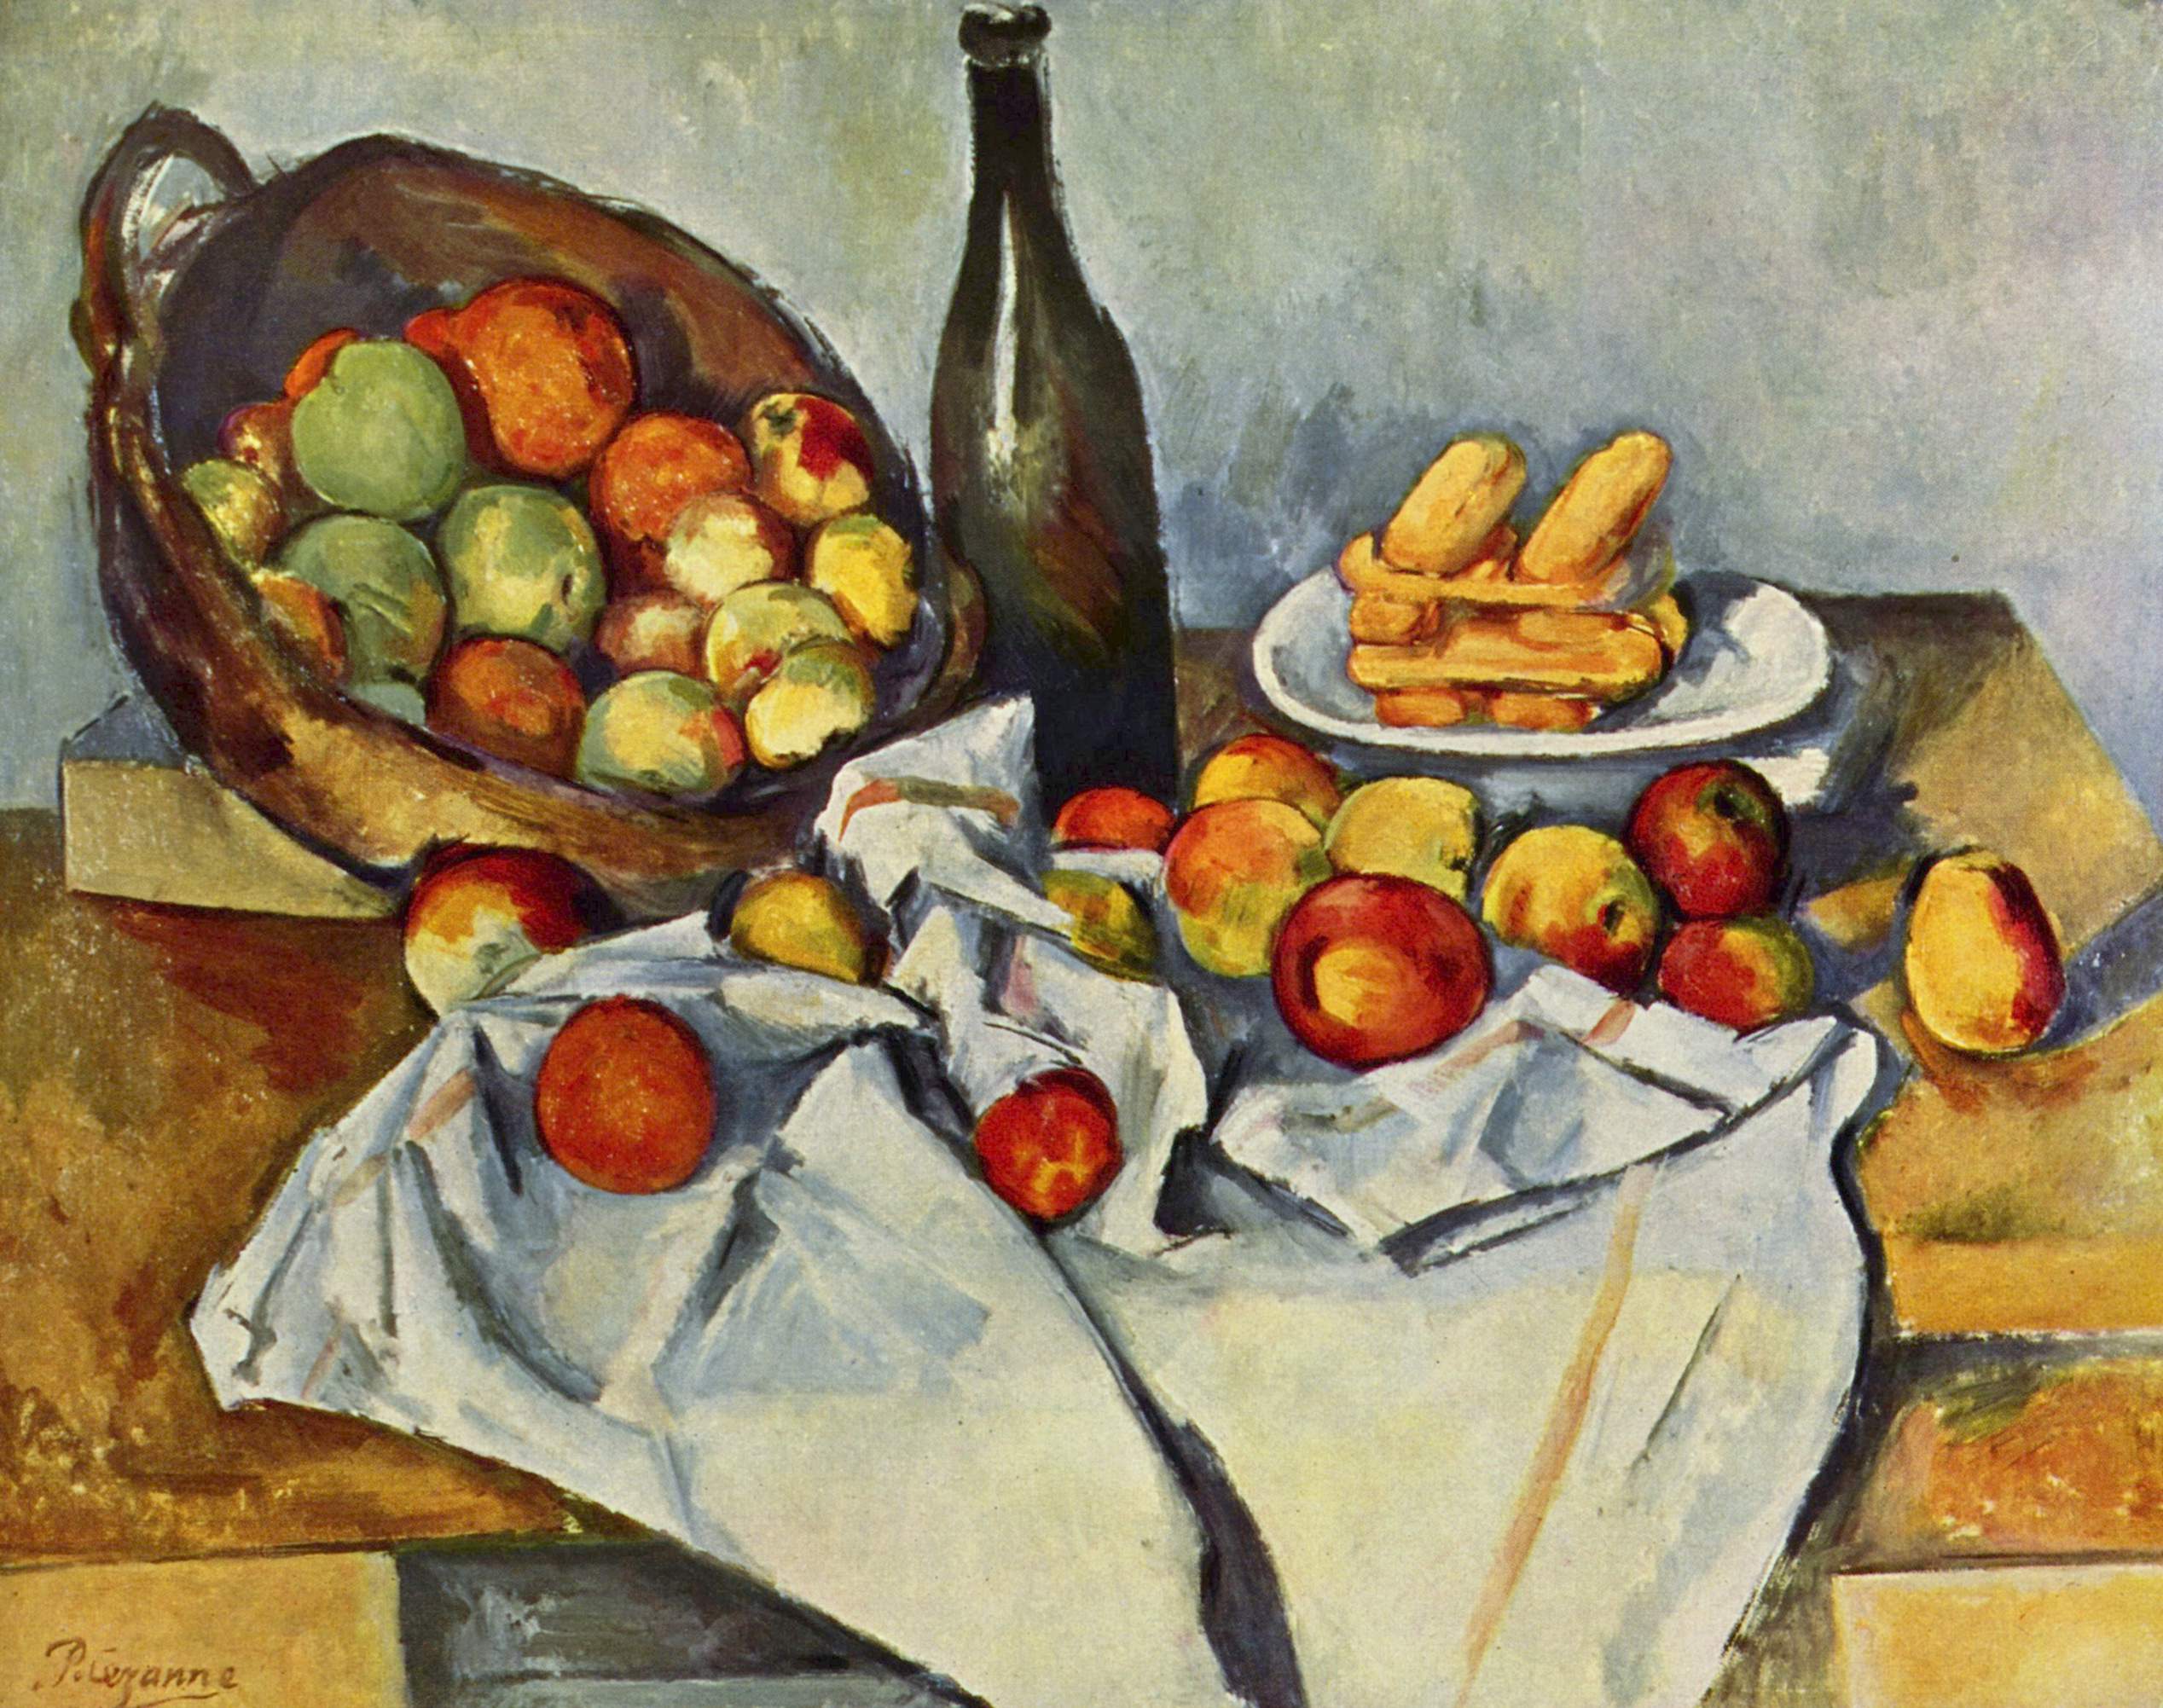 Basket of Apples by Paul Cézanne - 1895 - 62 x 79 cm private collection